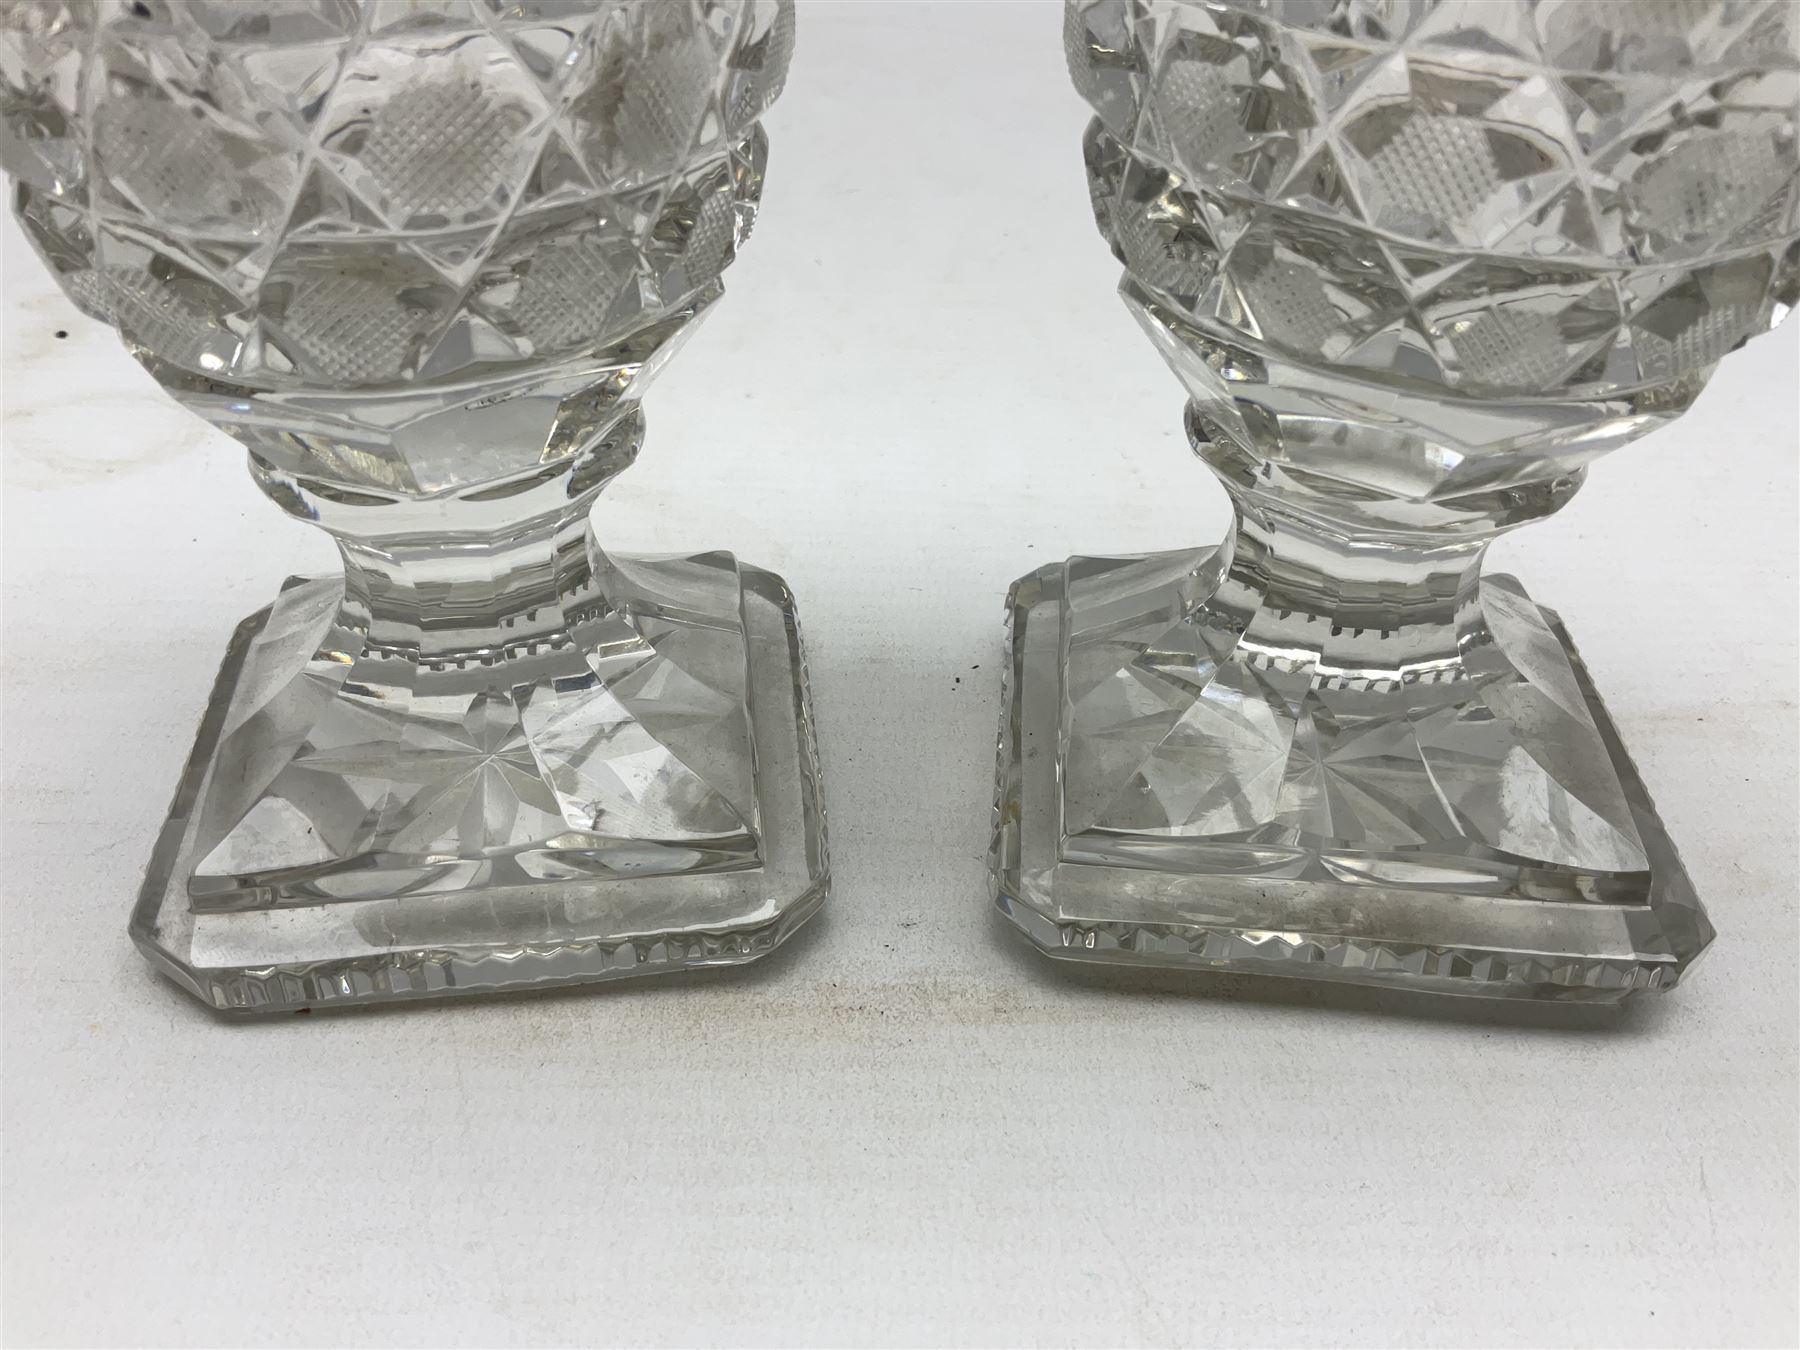 Pair of early 19th century heavy cut glass vases - Image 5 of 6